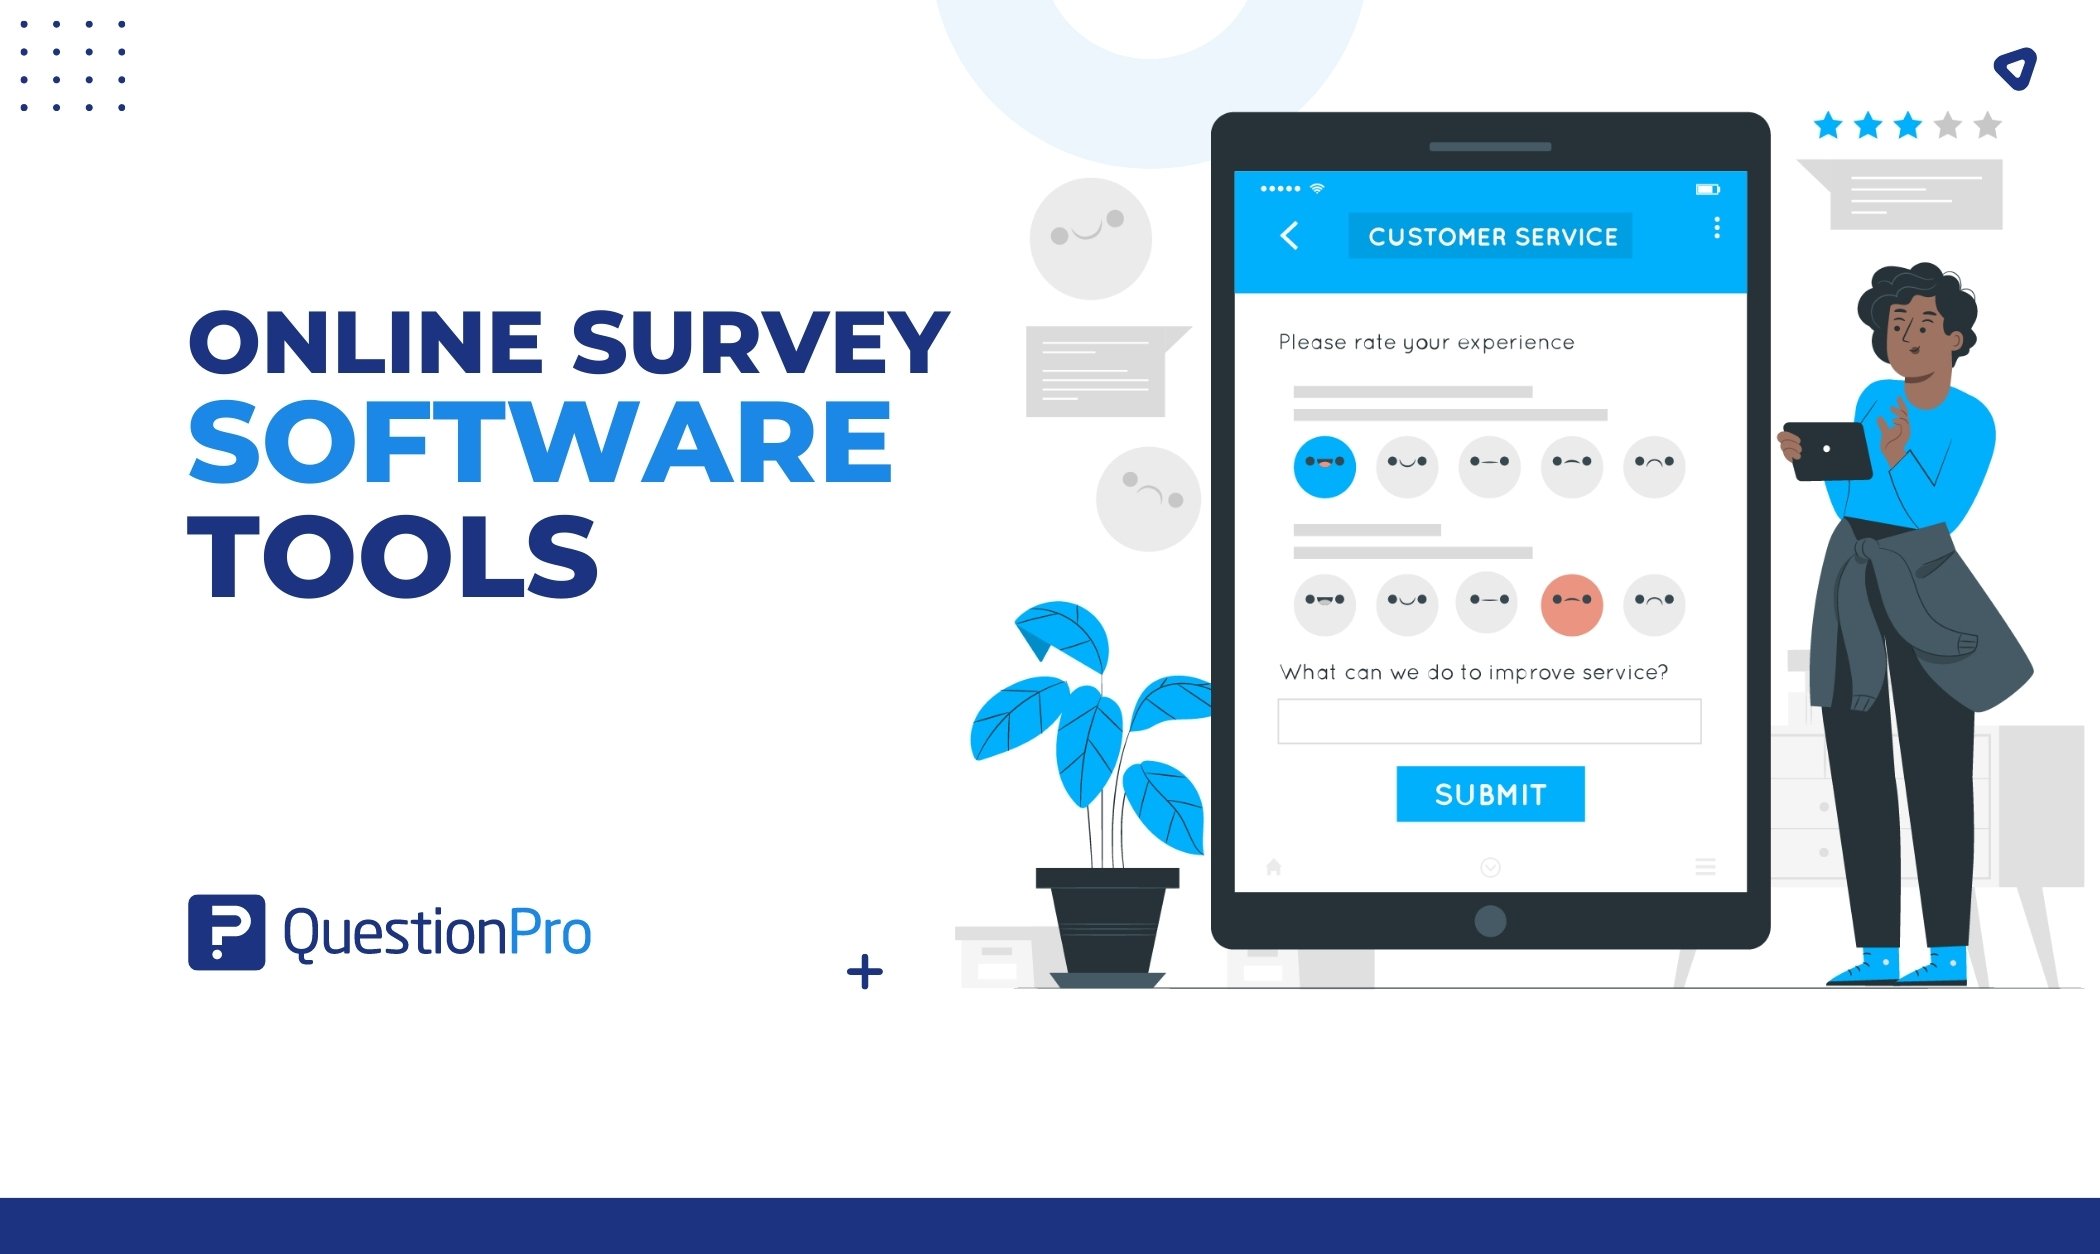 Gain valuable insights with our top online survey software tools in 2023. Make data-driven decisions for your business success.